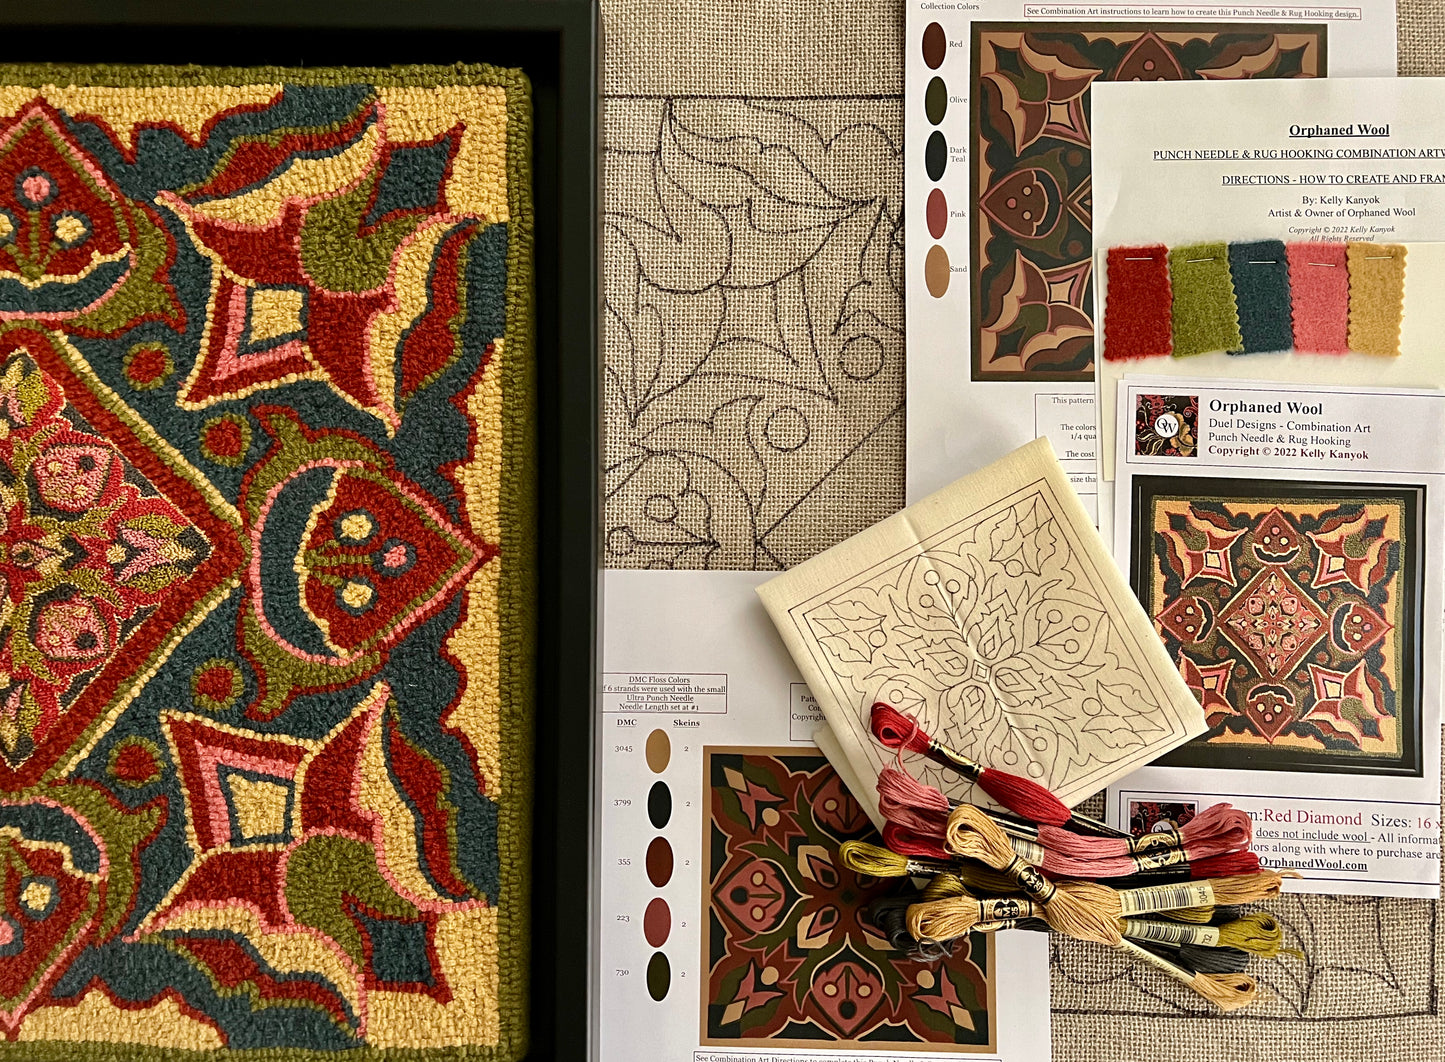 Red Diamond- Rug Hooking and Punch Needle design by Orphaned Wool is a kit designed for the punch needle and rug hooking artist. It is a fantastic kit that gives you all the information needed to create this very unique type of design.